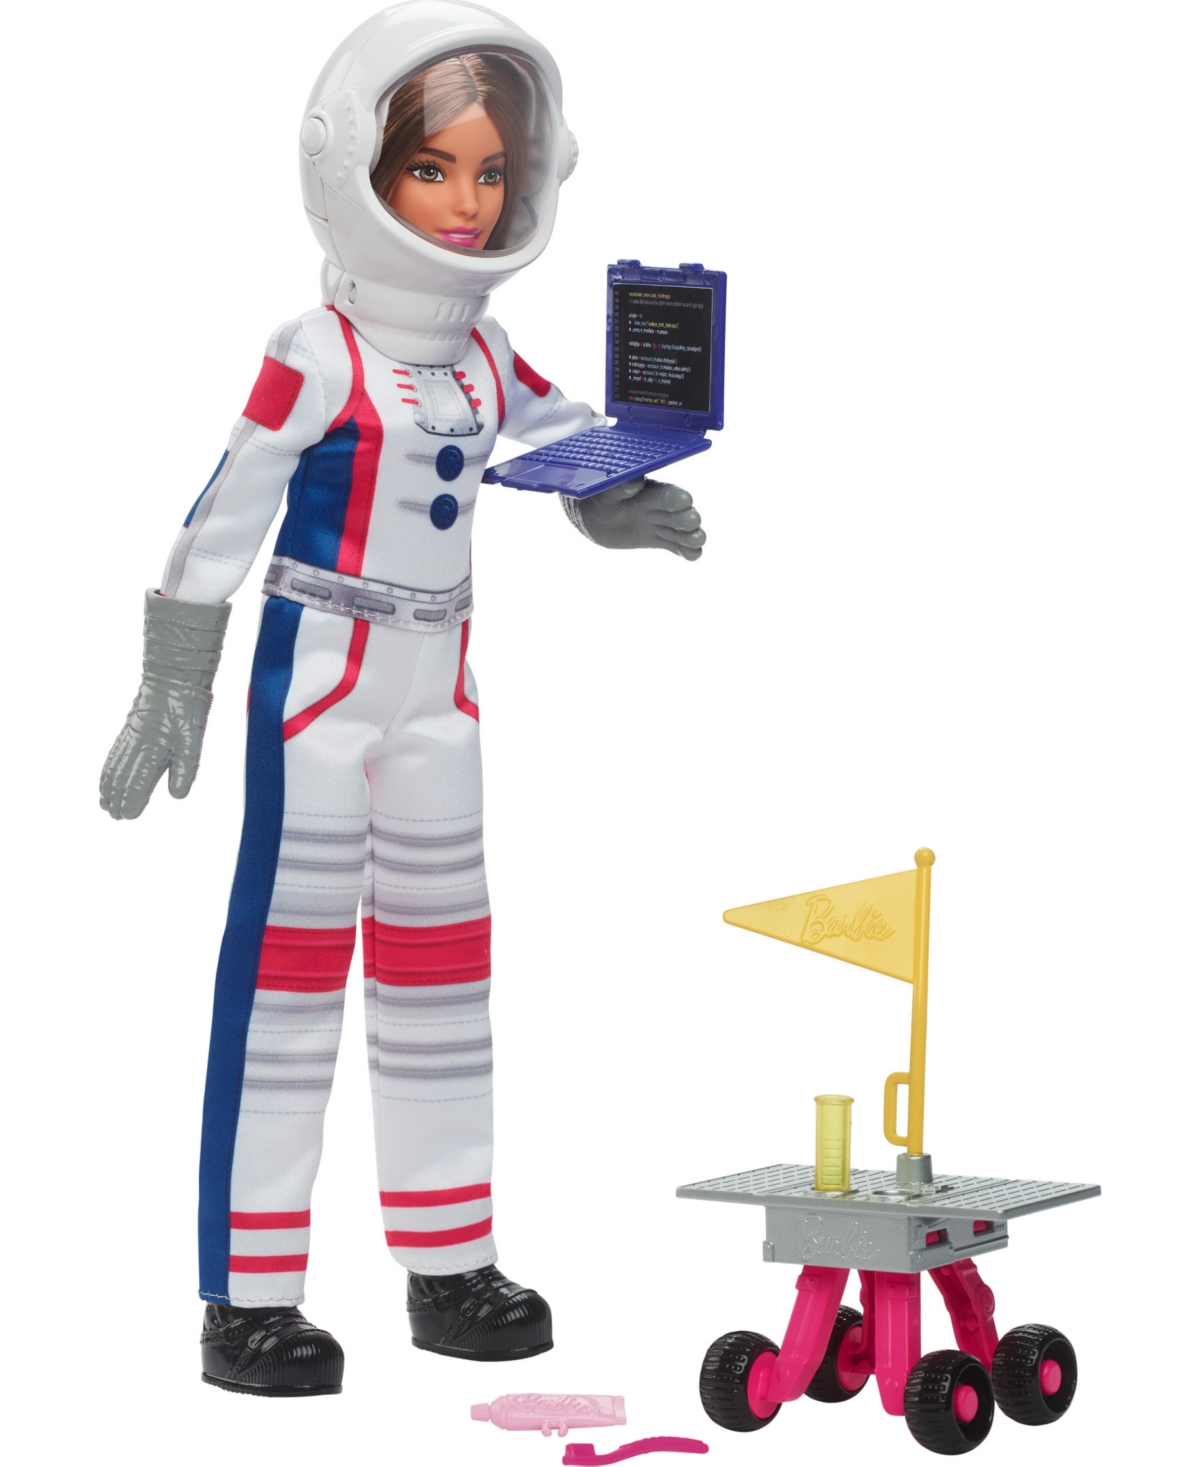 Barbie Kids' 65th Anniversary Careers Astronaut Doll And 10 Accessories Including Rolling Rover And Space Helmet In Multi